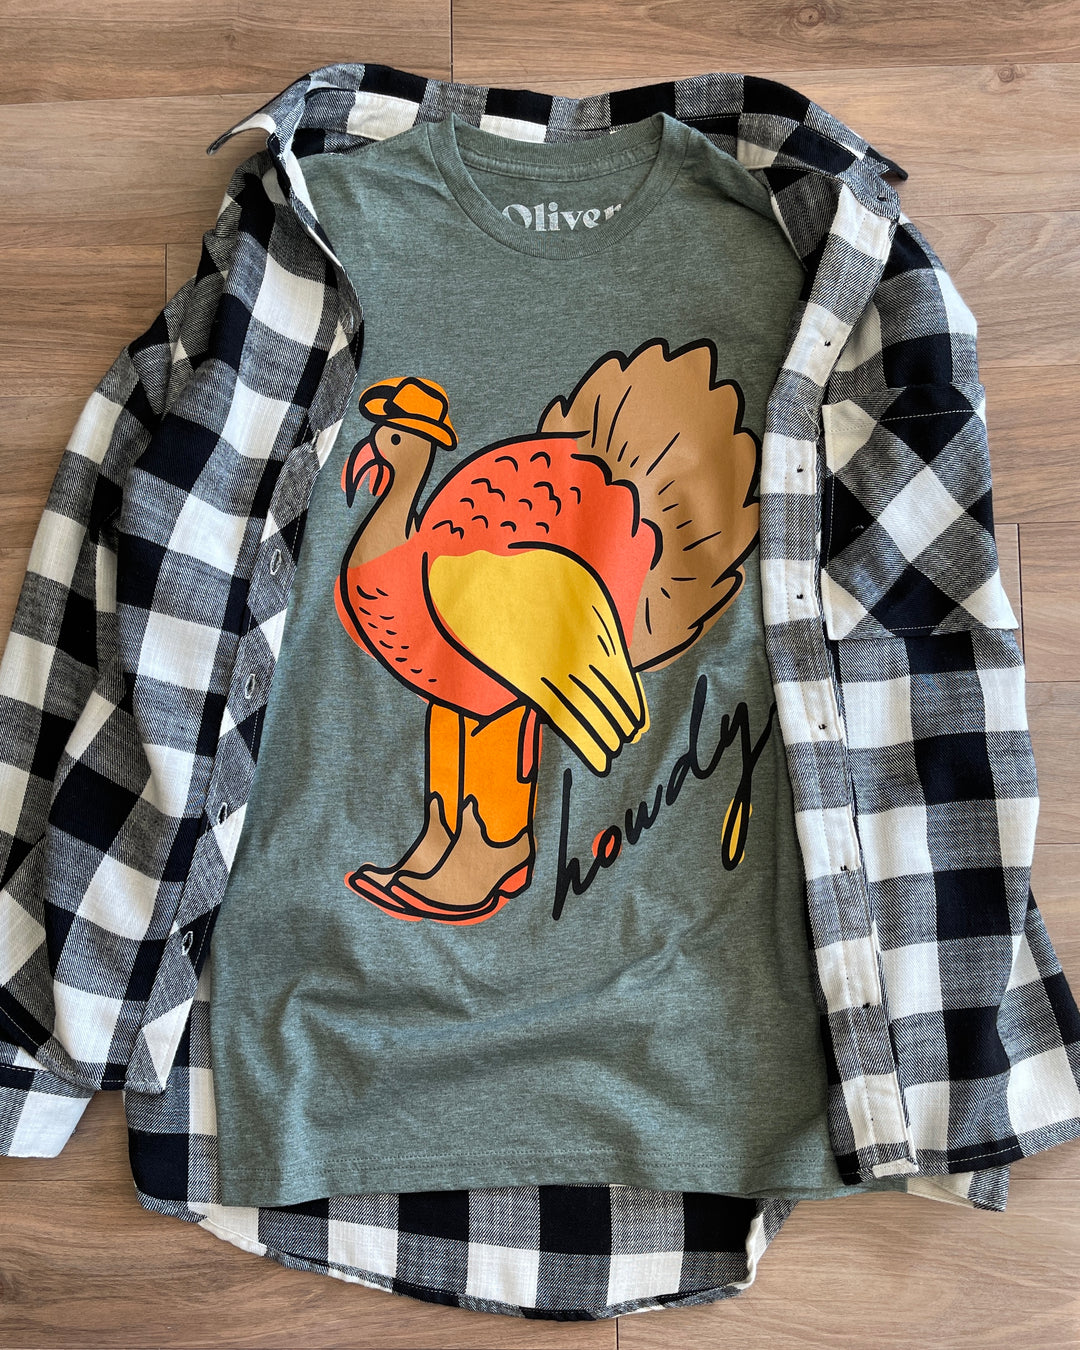 green tee, with hand drawn turkey in cowboy boots and text Howdy, paired with black and white flannel (items sold separately)